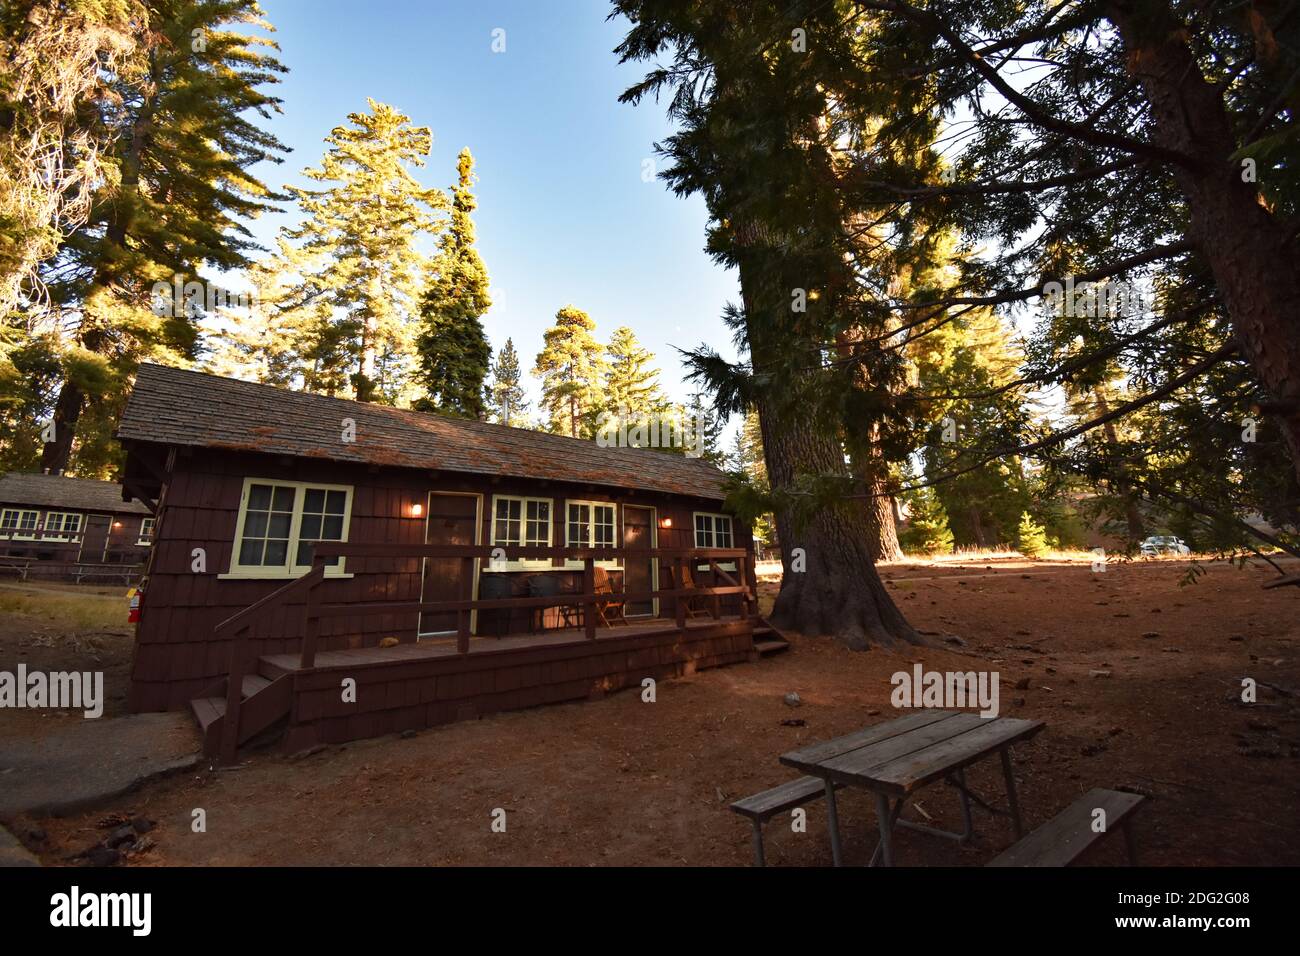 The rustic timber Grant Grove Cabins in Kings Canyon National Park, California, USA, situated amongst large pine trees in the Sierra Nevadas. Stock Photo